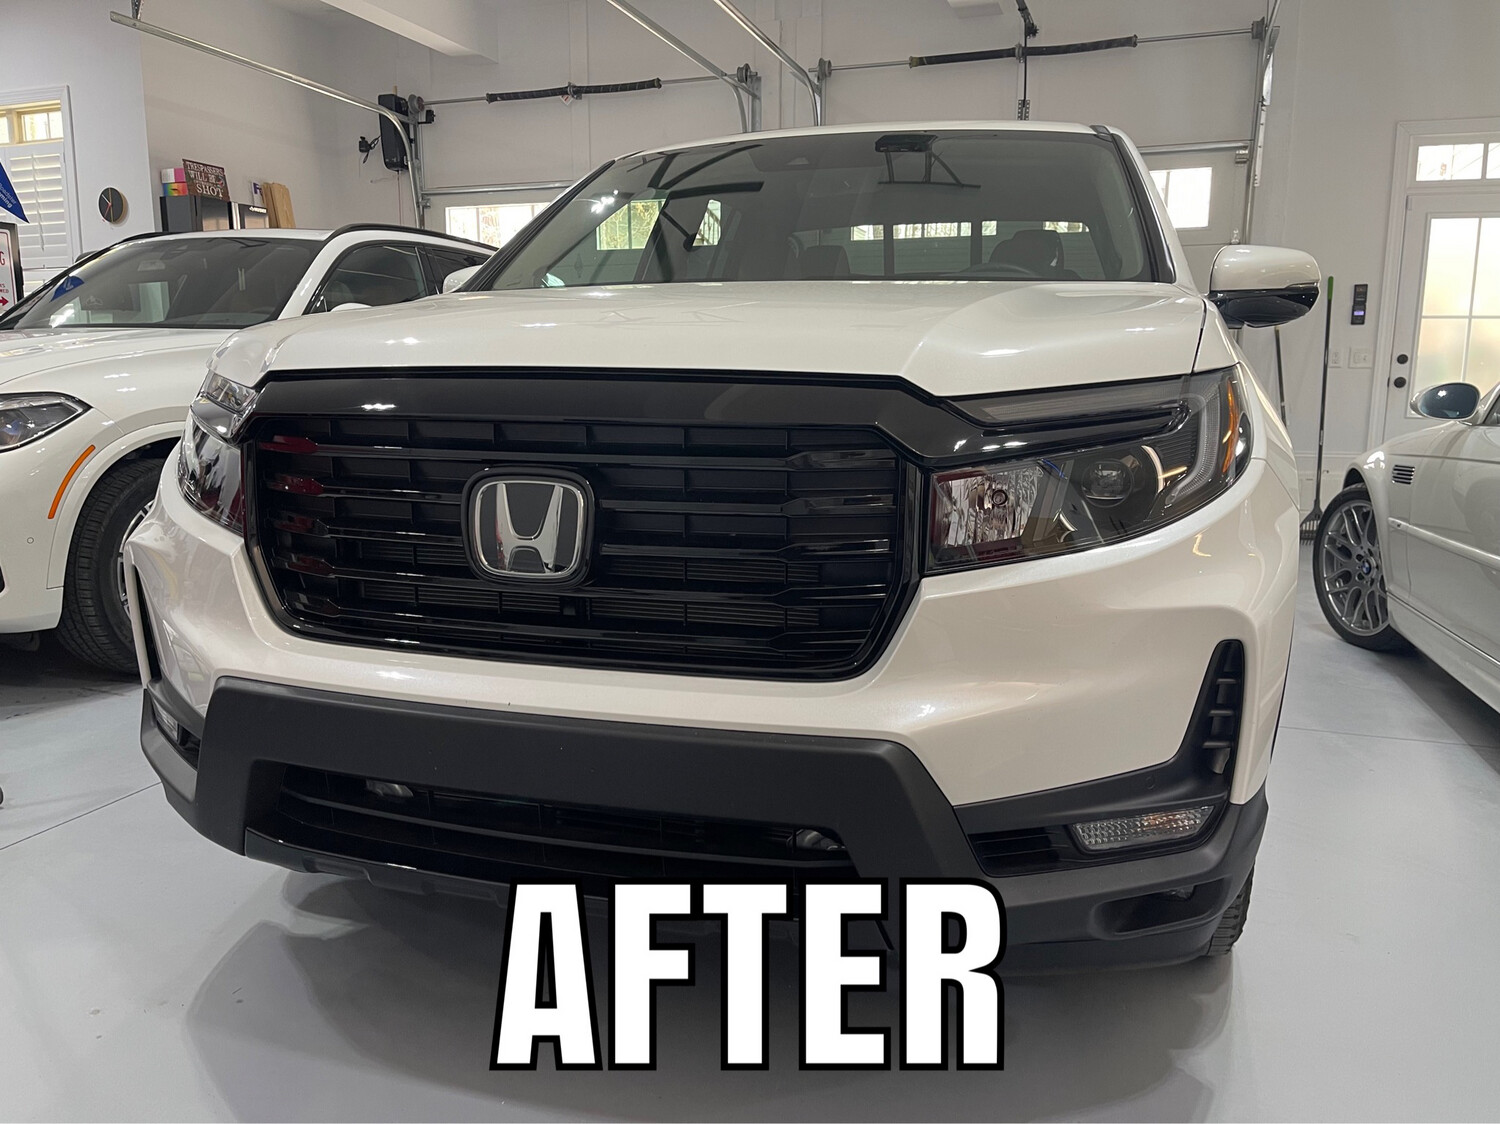 Honda OEM Ridgeline Refresh Chrome Delete Grill Ascent To Gloss Black Edition - Fits 2021 to 2023